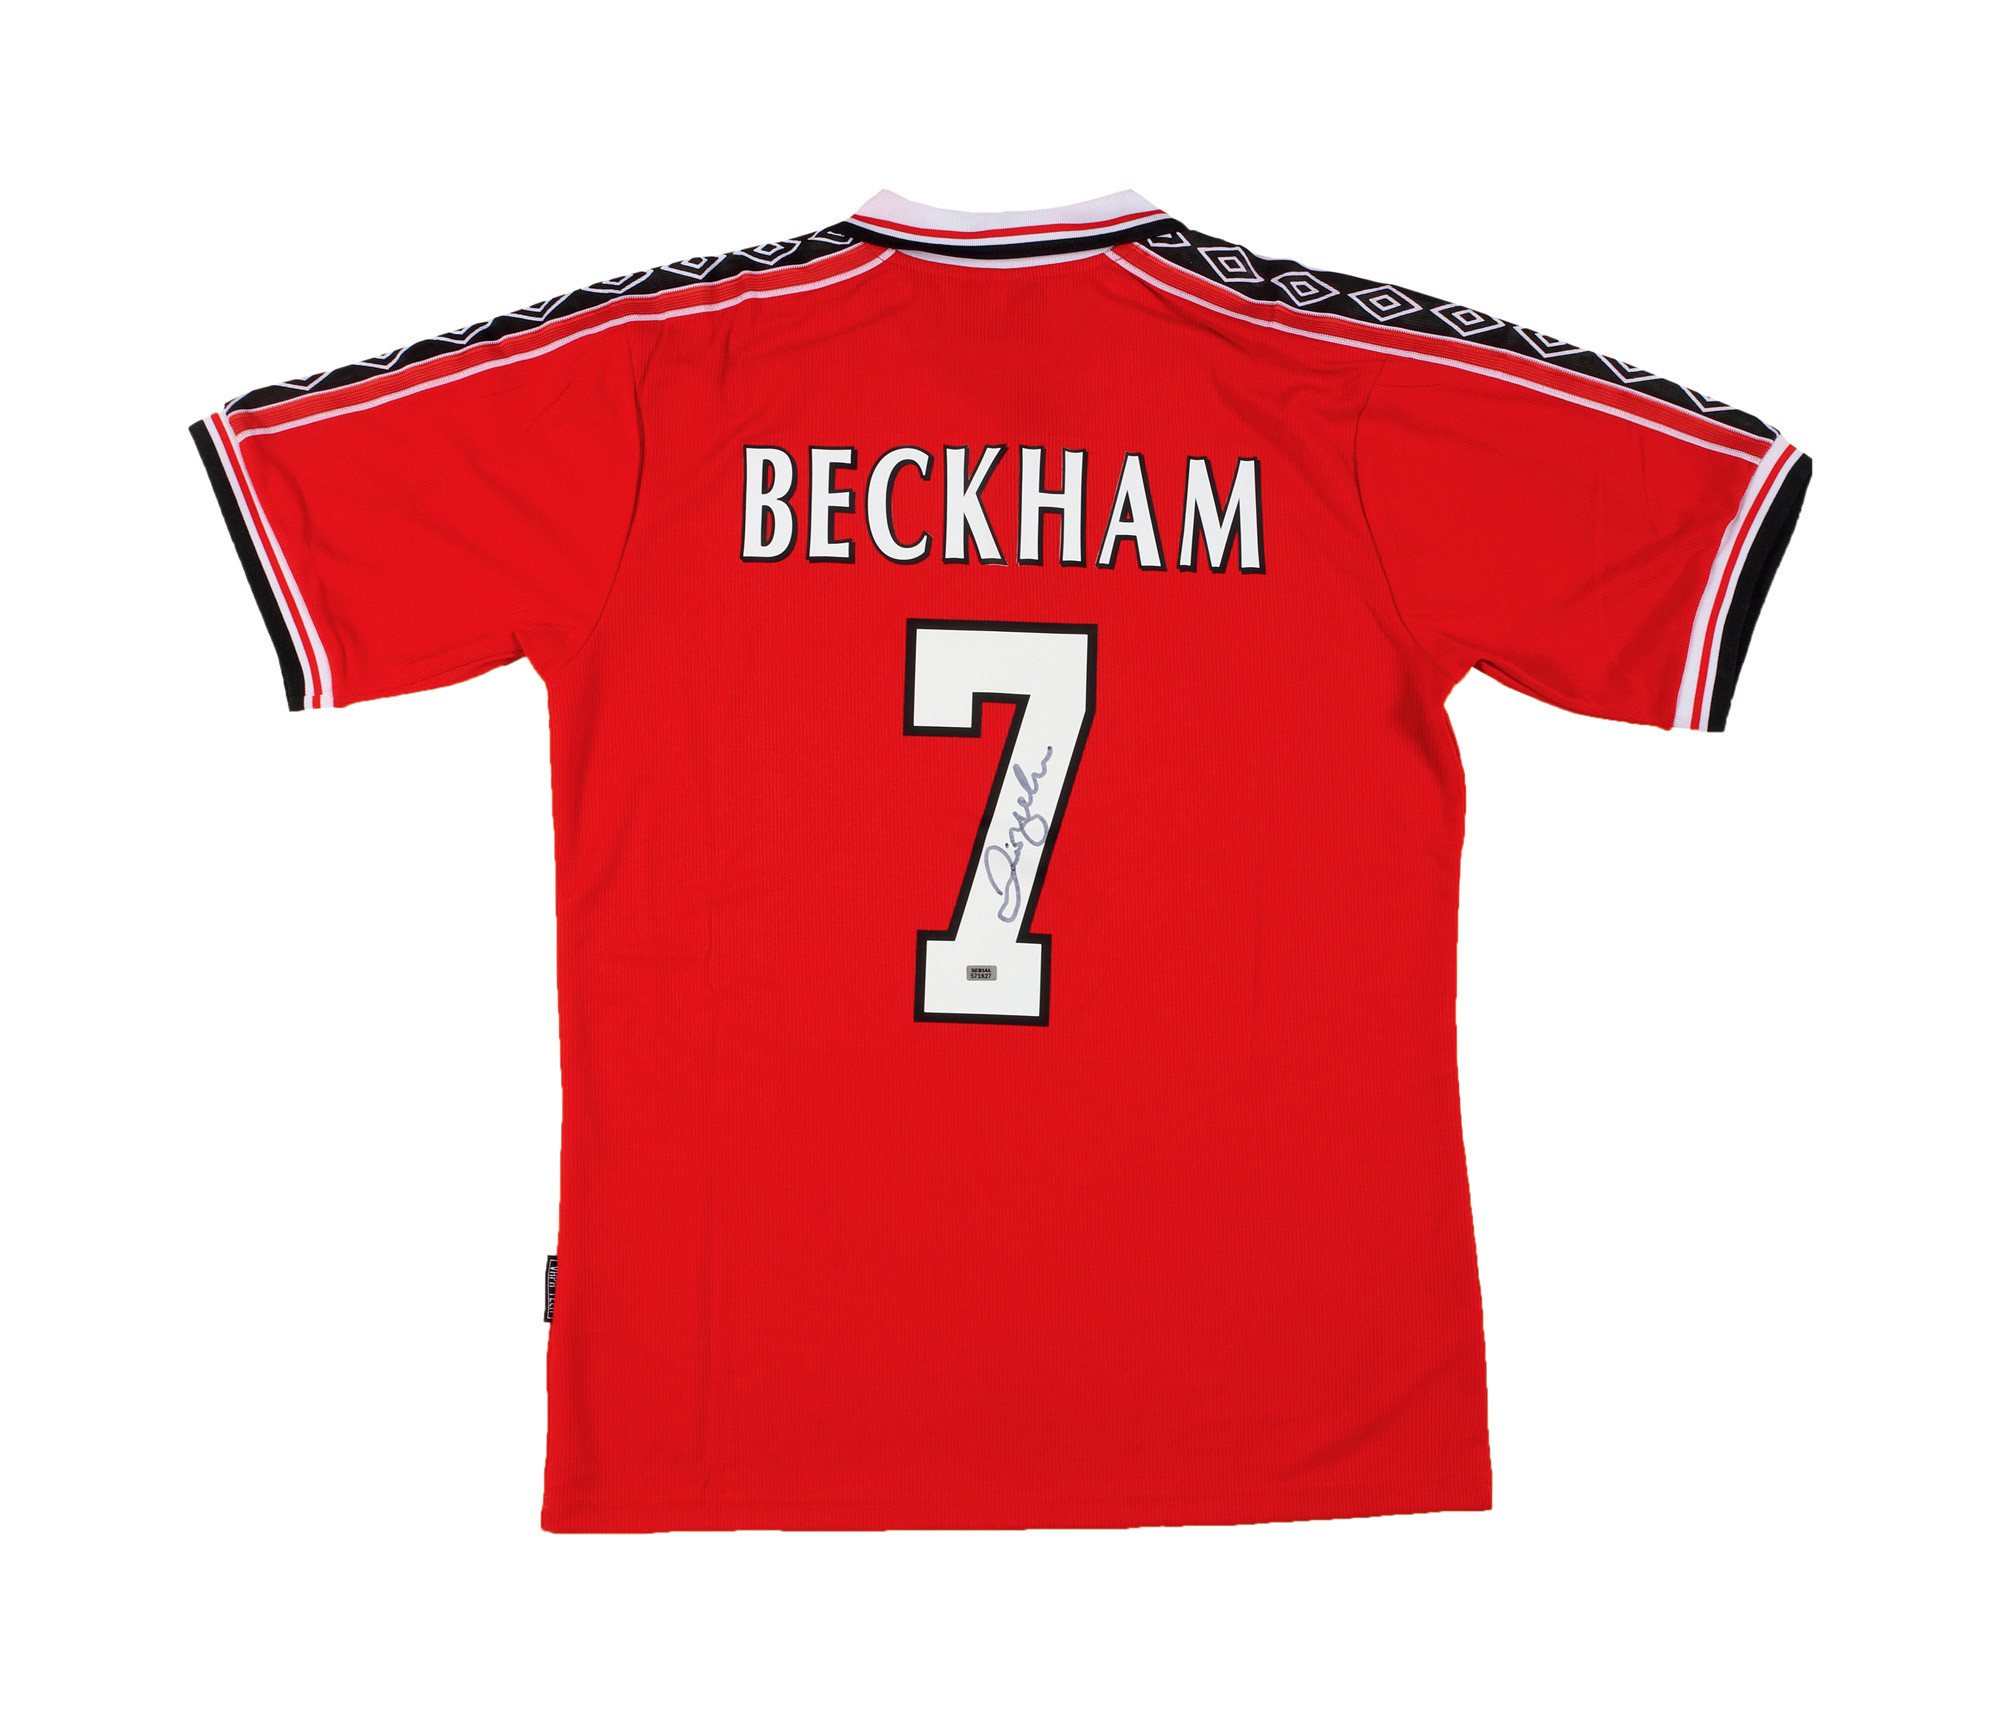 The autographed Manchester United shirt signed by David Beckham, the “stunner in the football circle”, with certificate